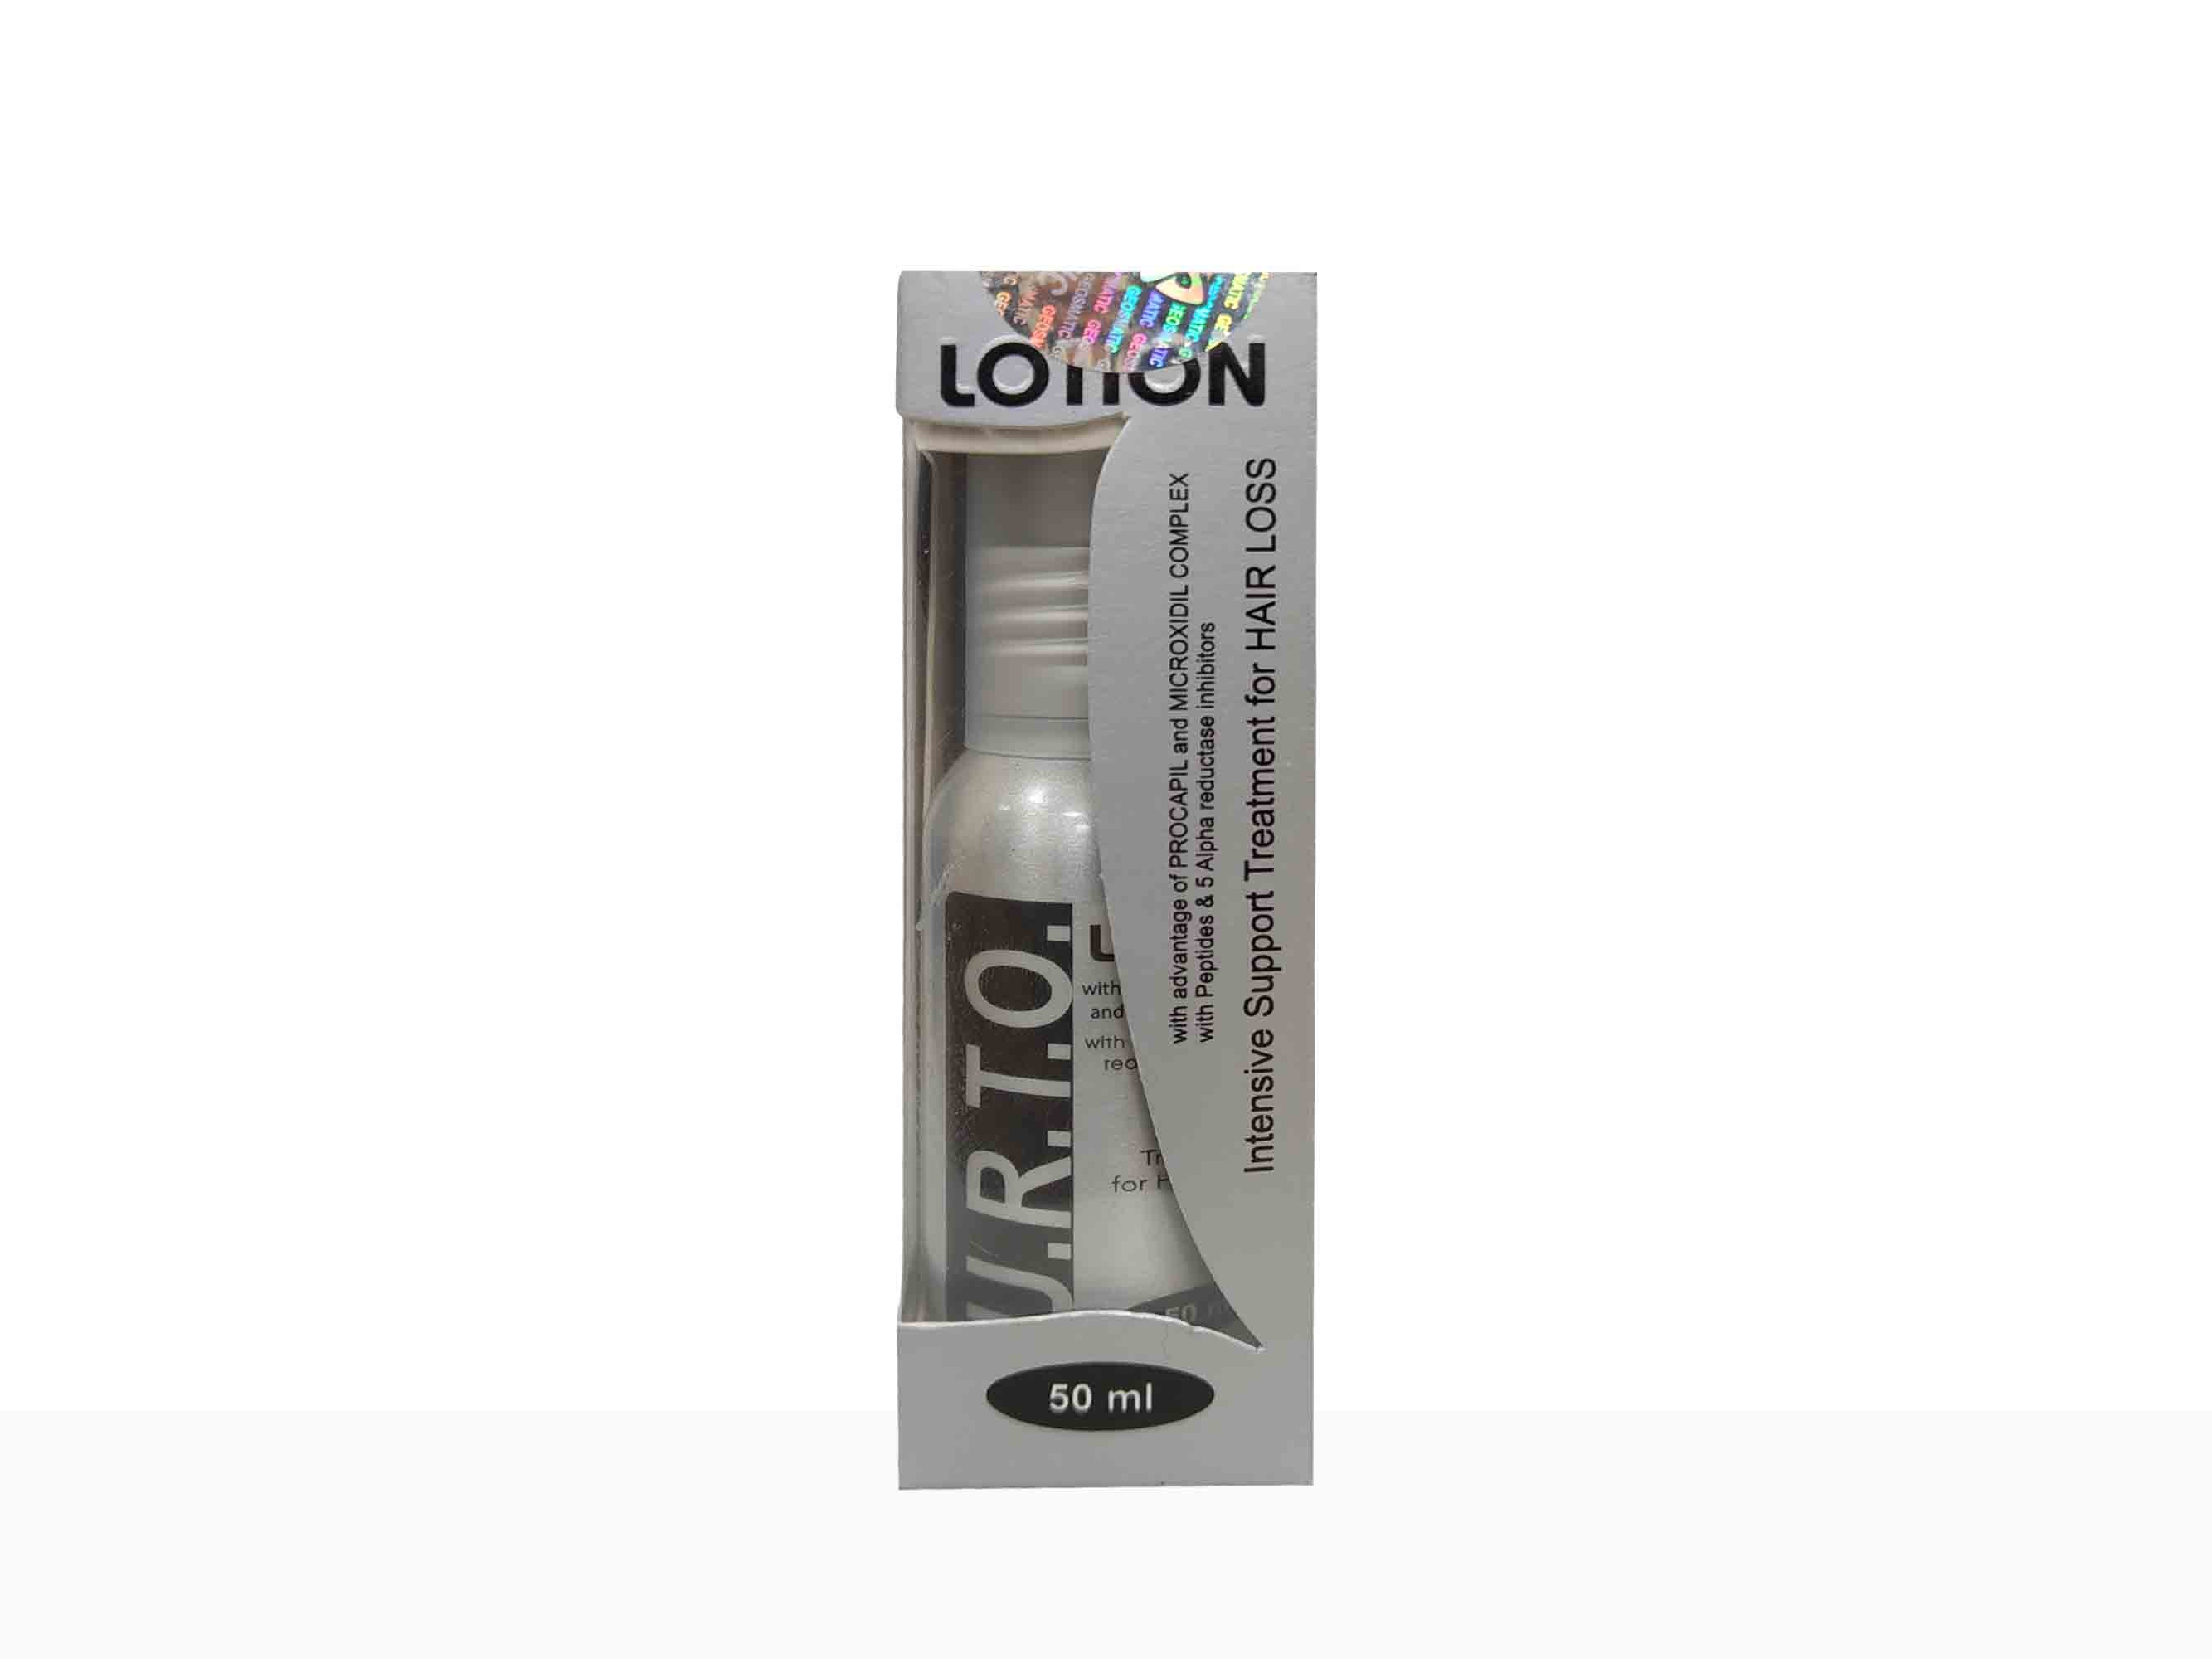 U.R.T.O Intensive Lotion For Hair Loss Treatment